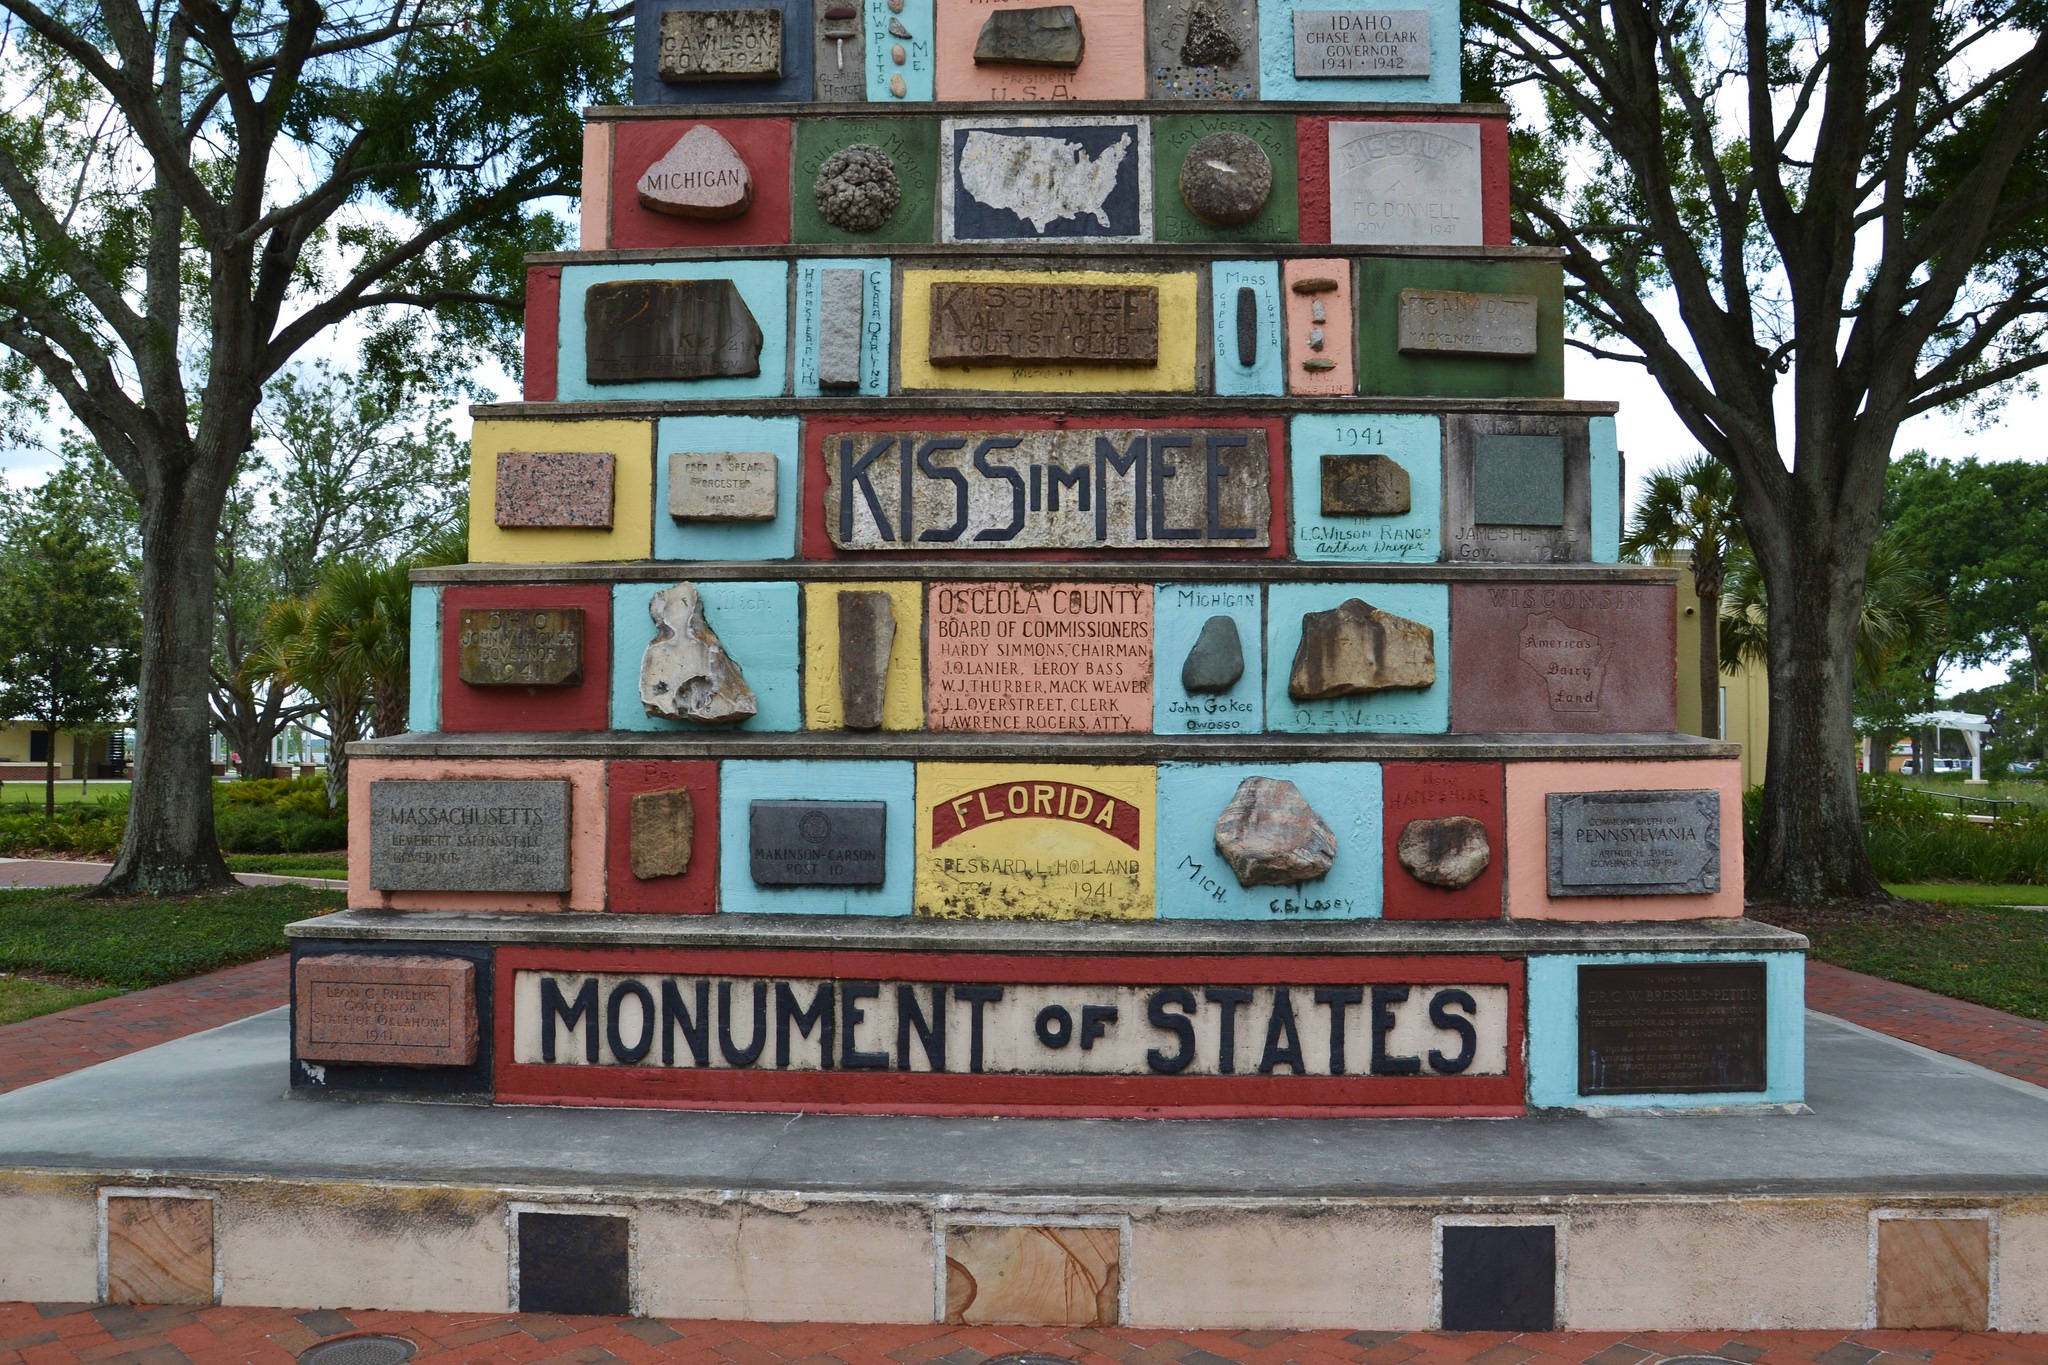 Monument of States